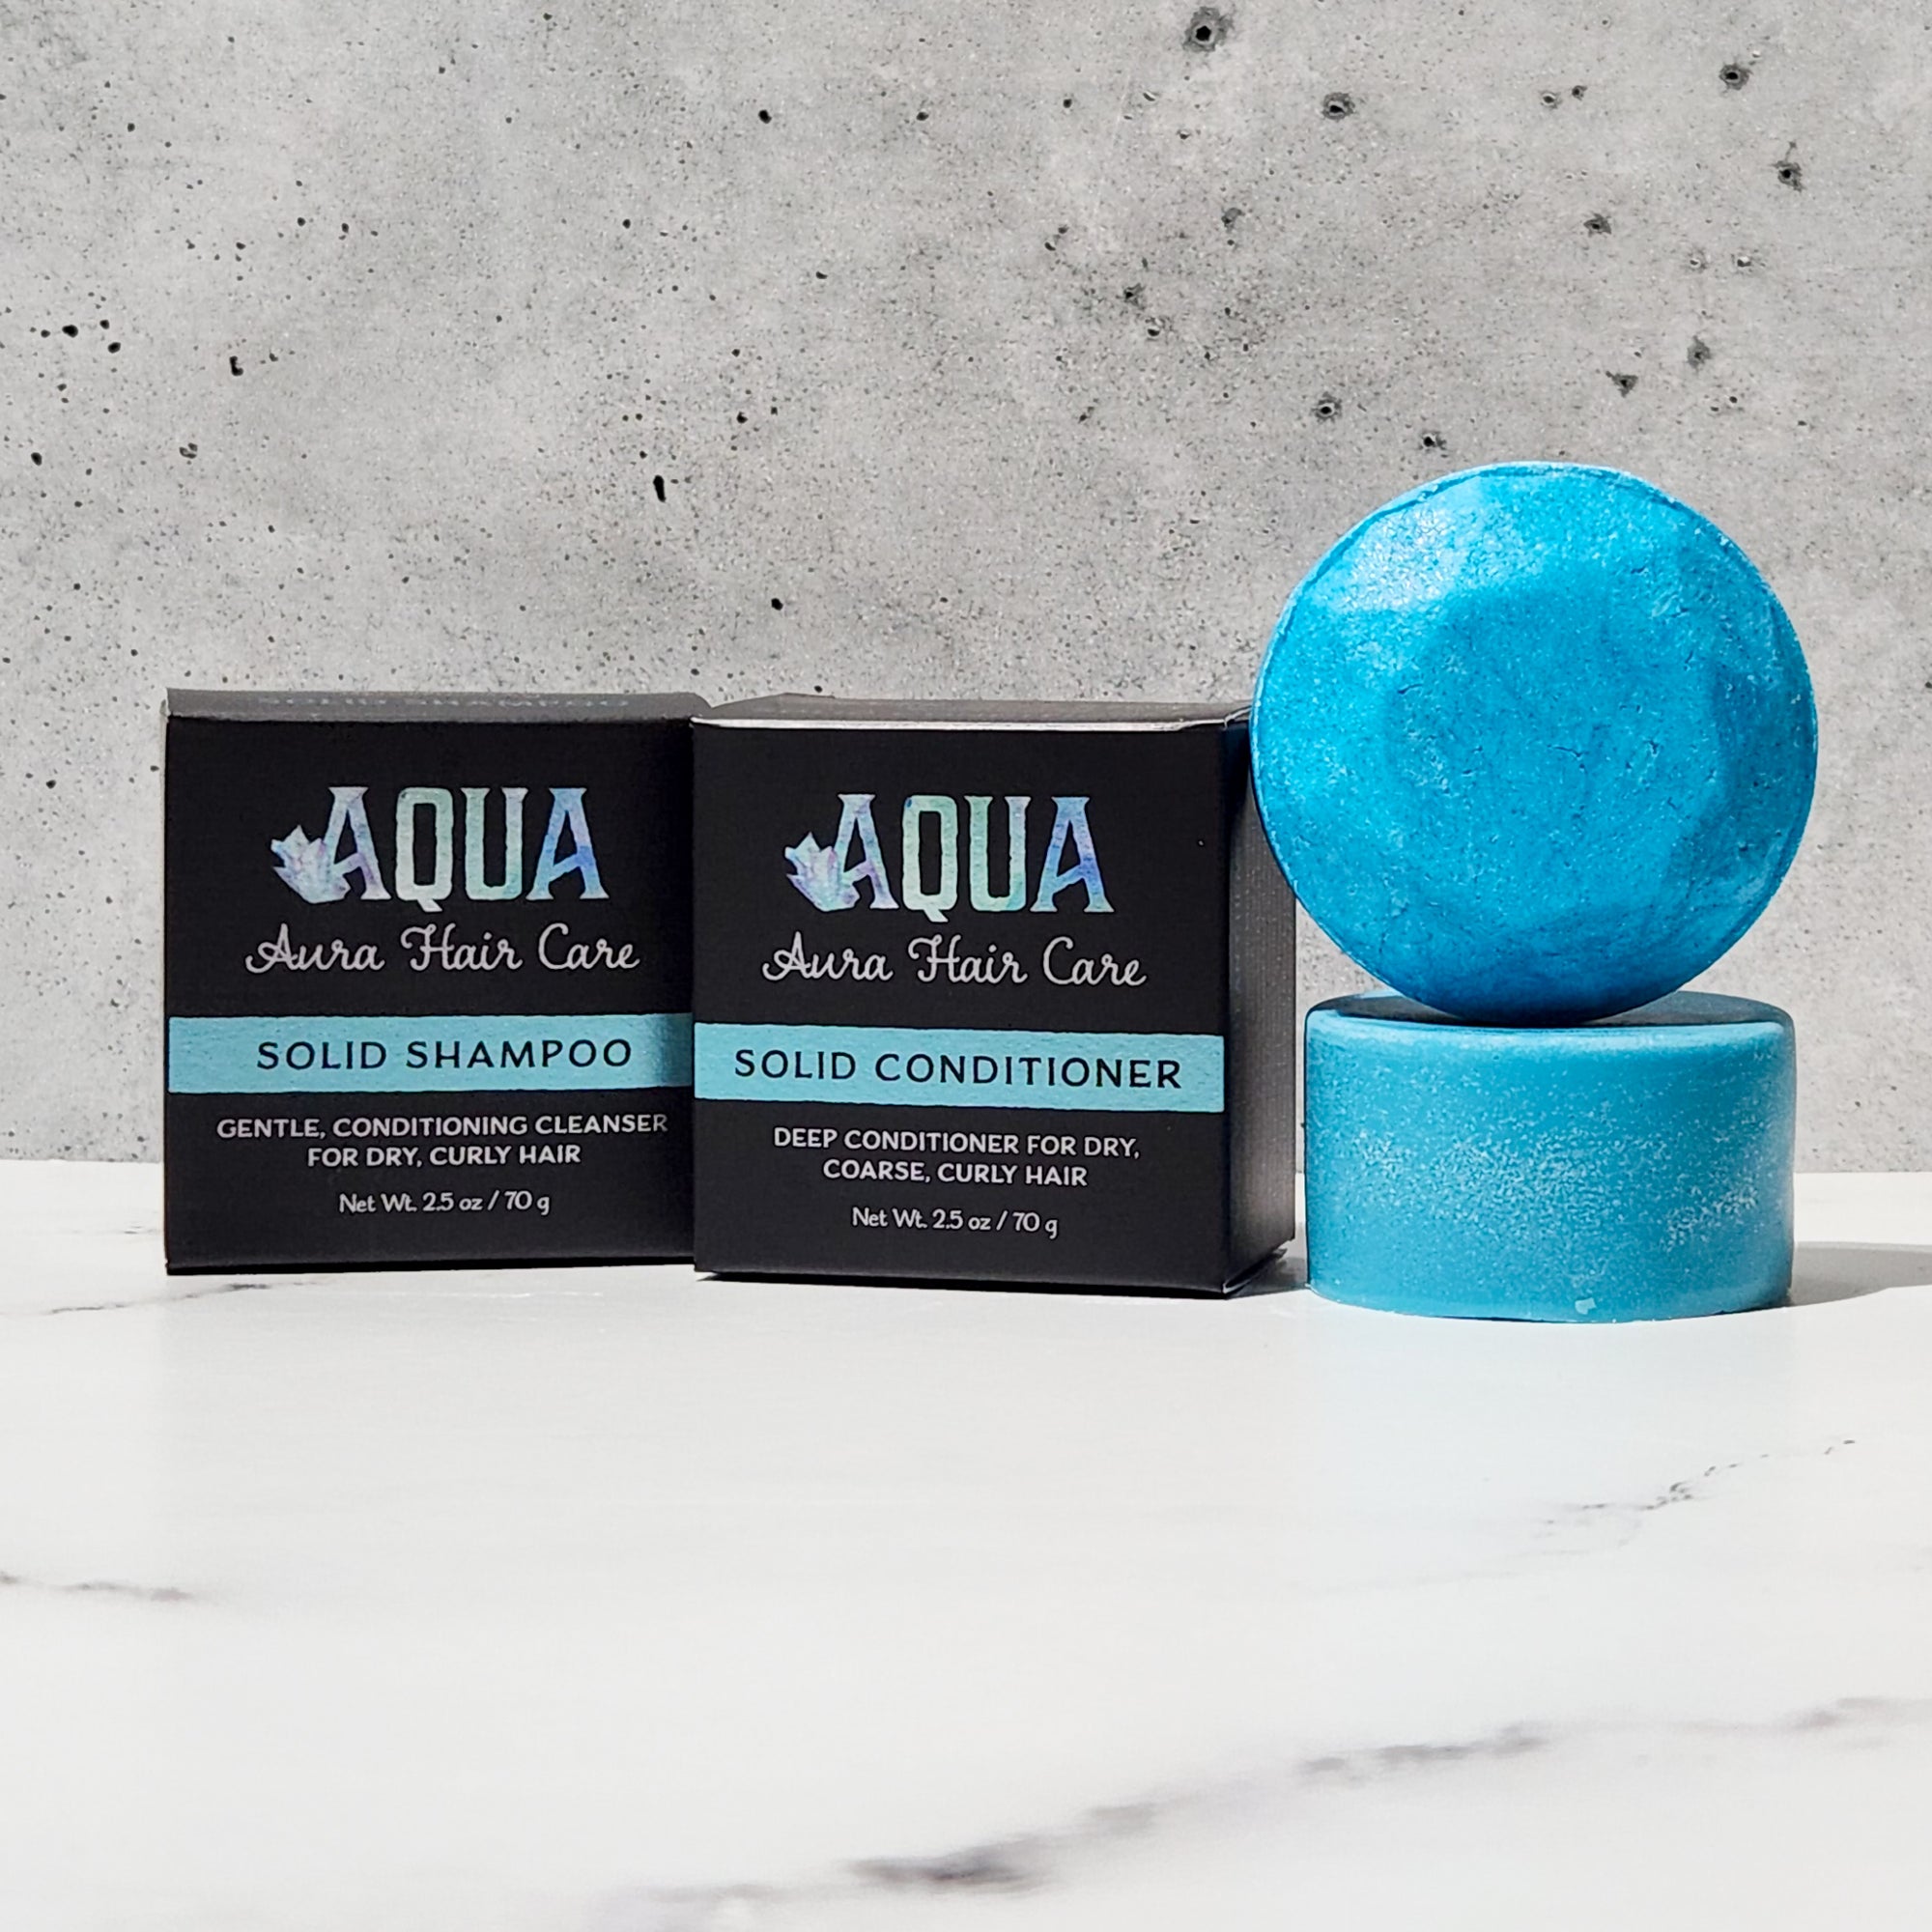 Aqua Aura Solid Shampoo and Conditioner Set for Dry, Course Curly Hair